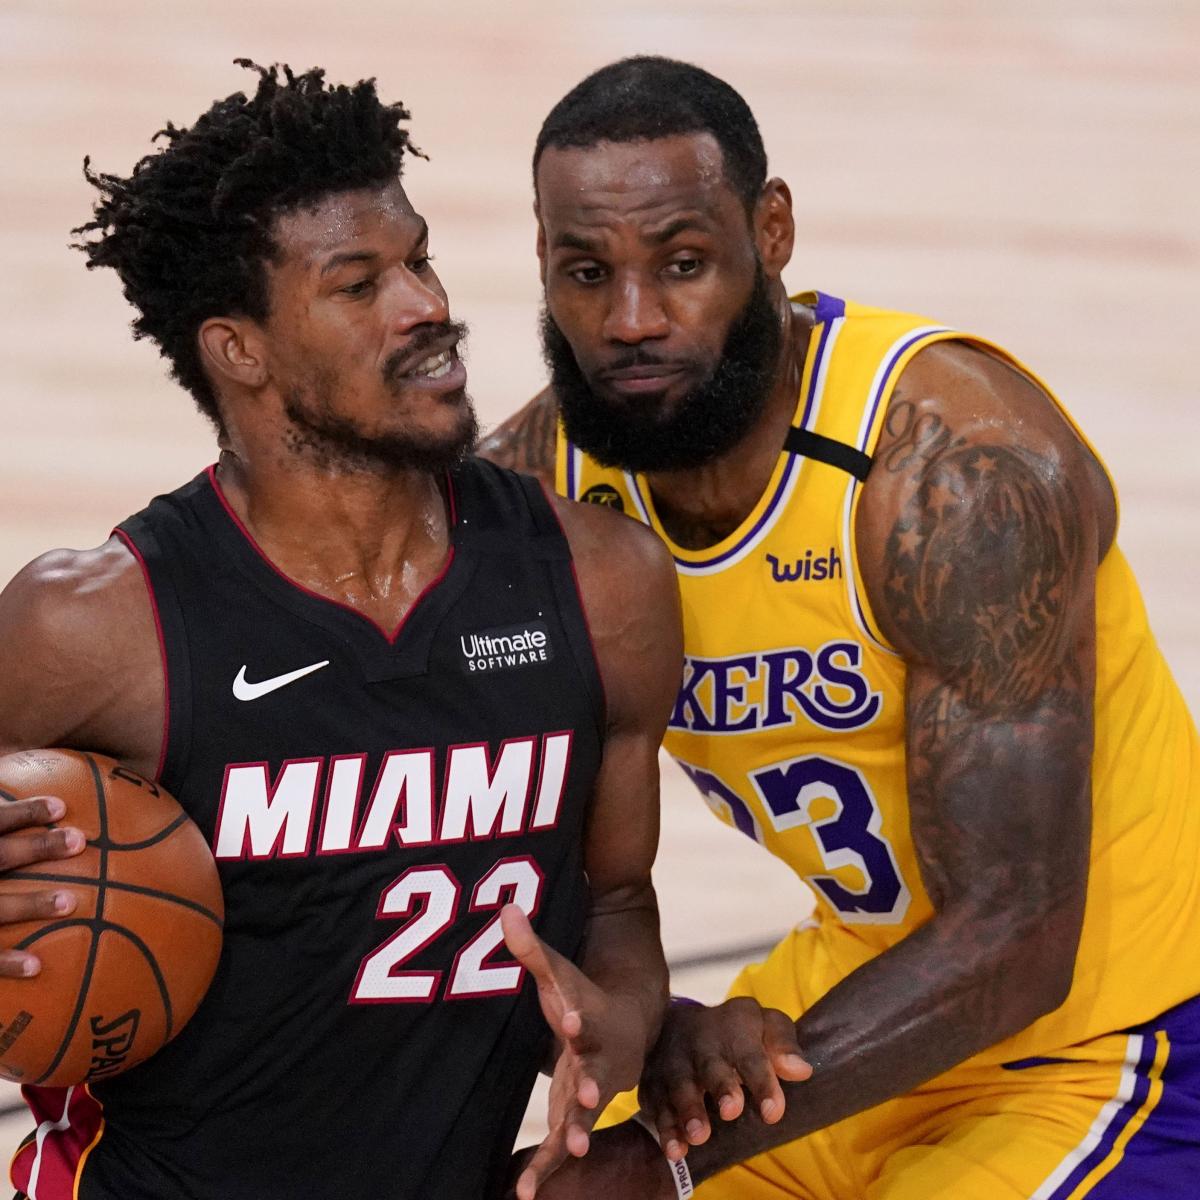 Heat vs. Lakers Game 4 Stats and NBA Finals 2020 Game 5 Schedule, Odds